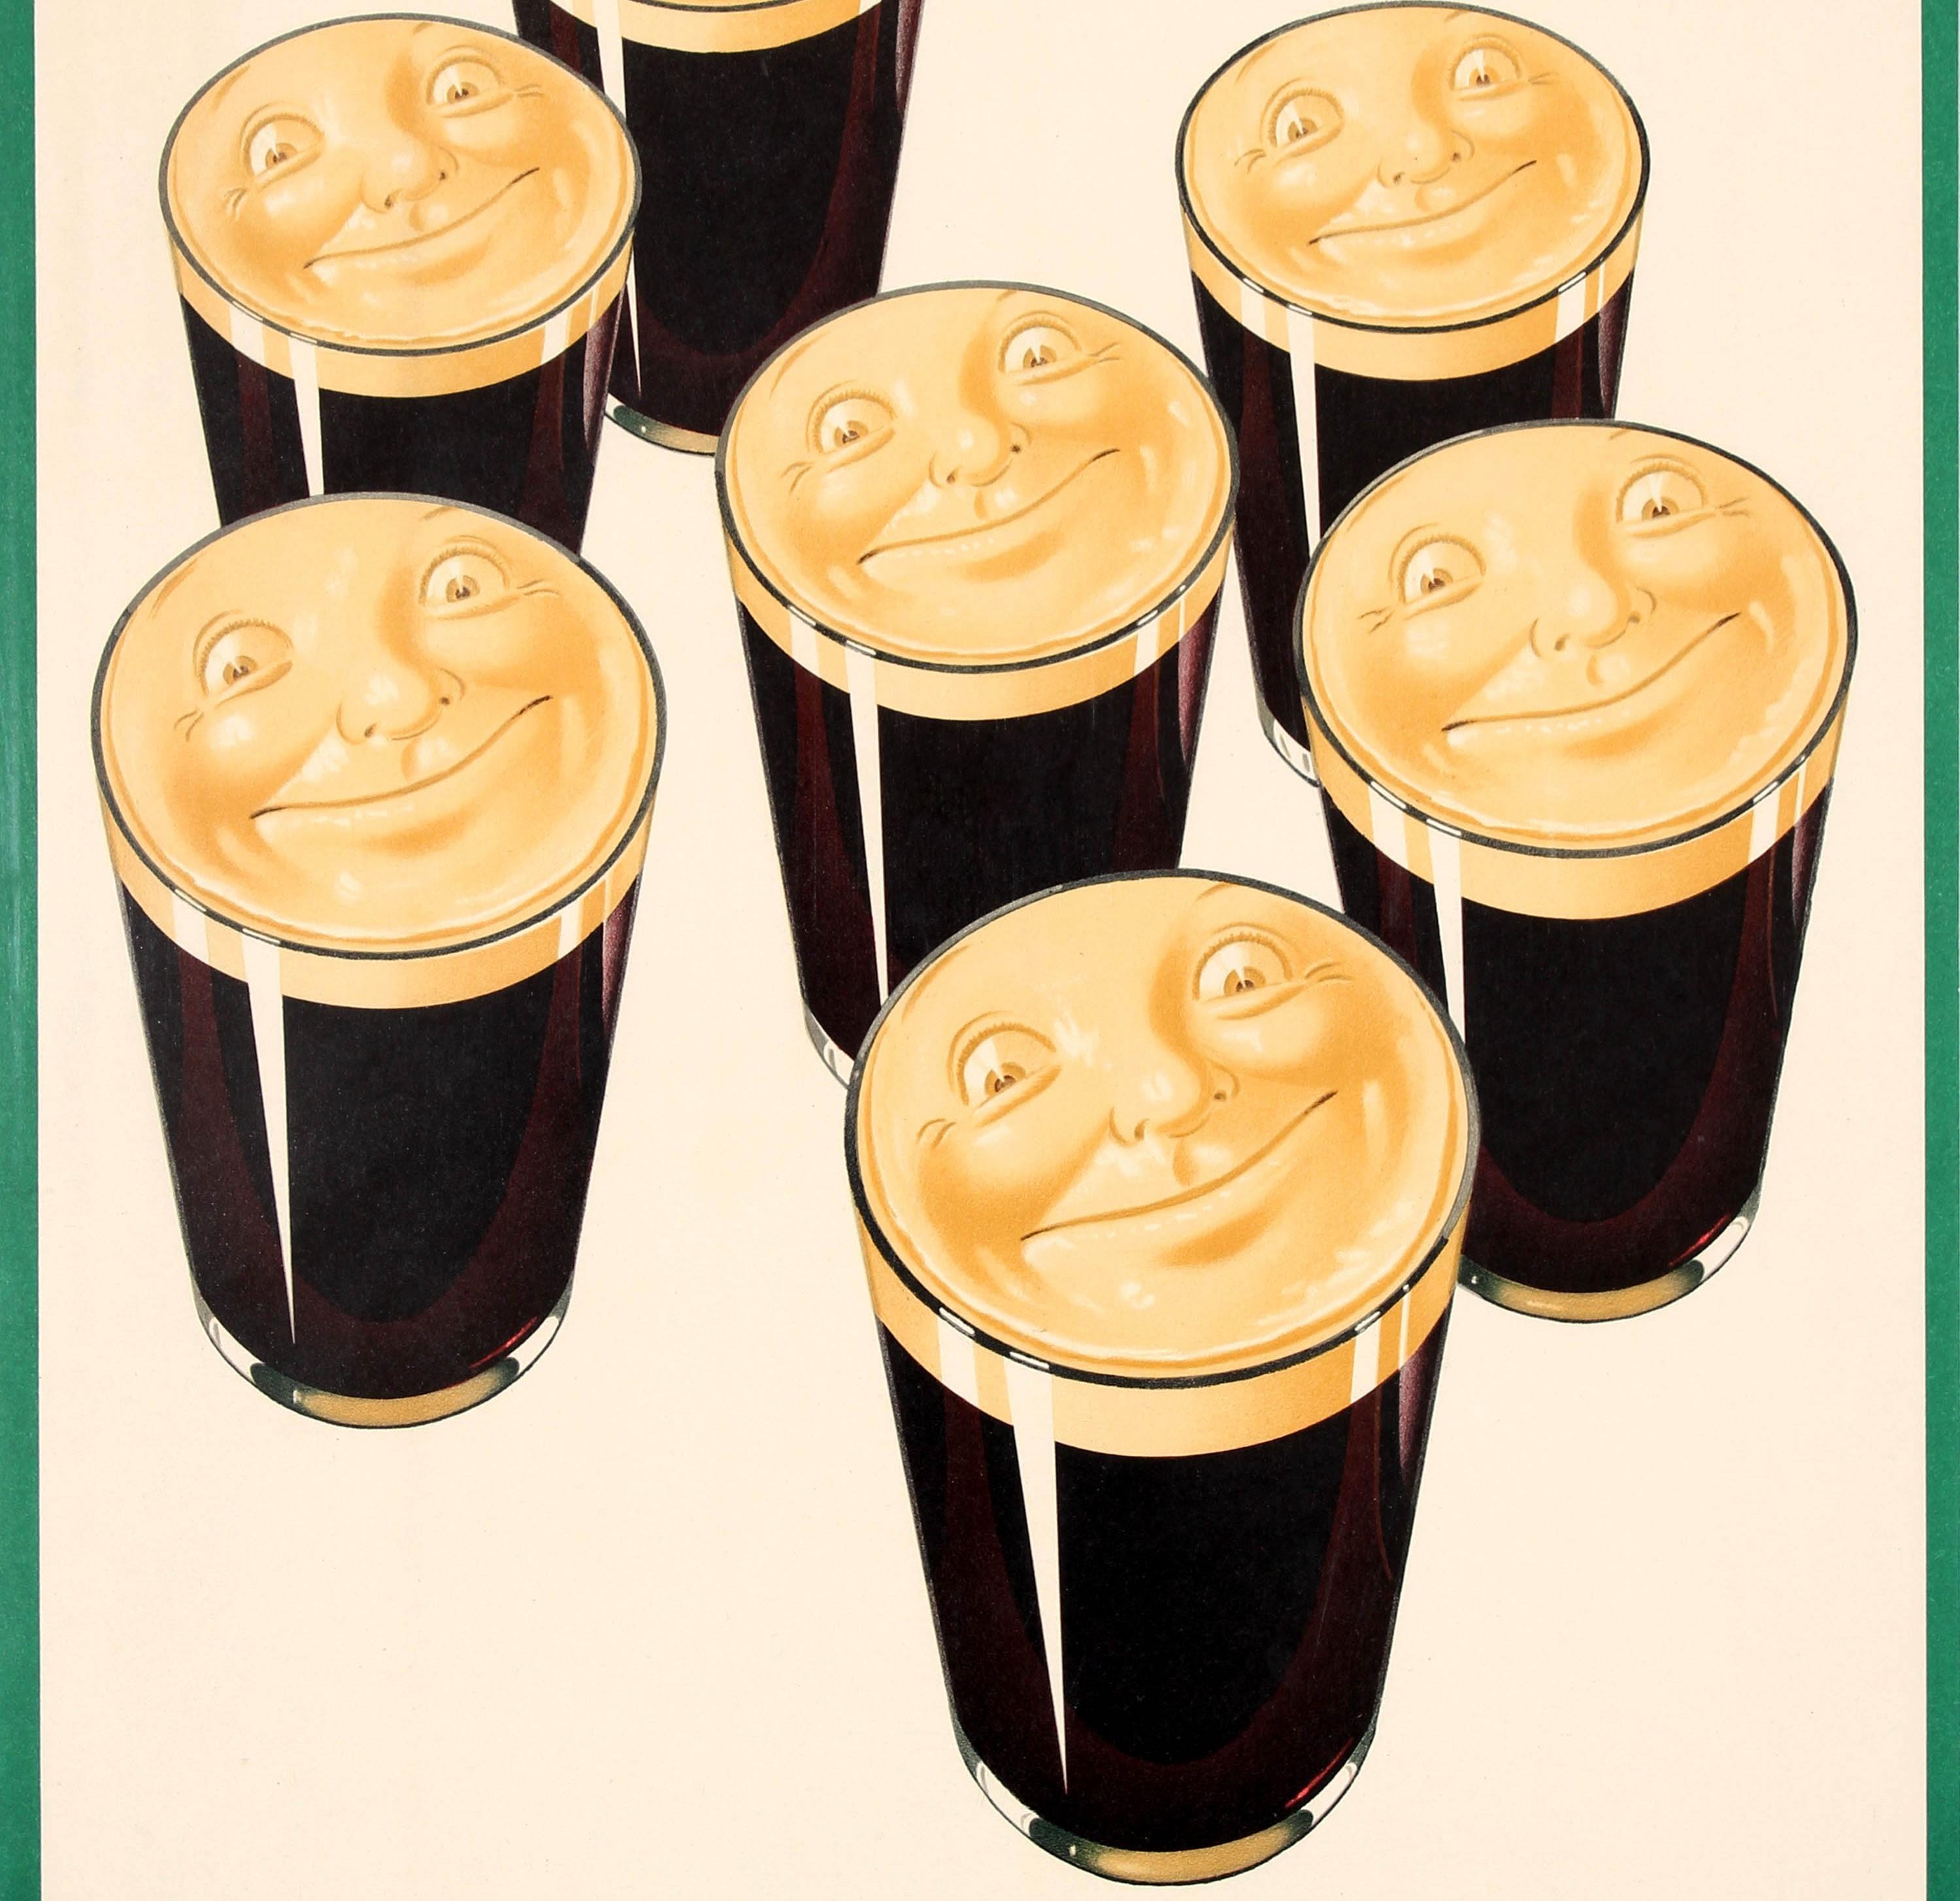 guinness it's good for you poster